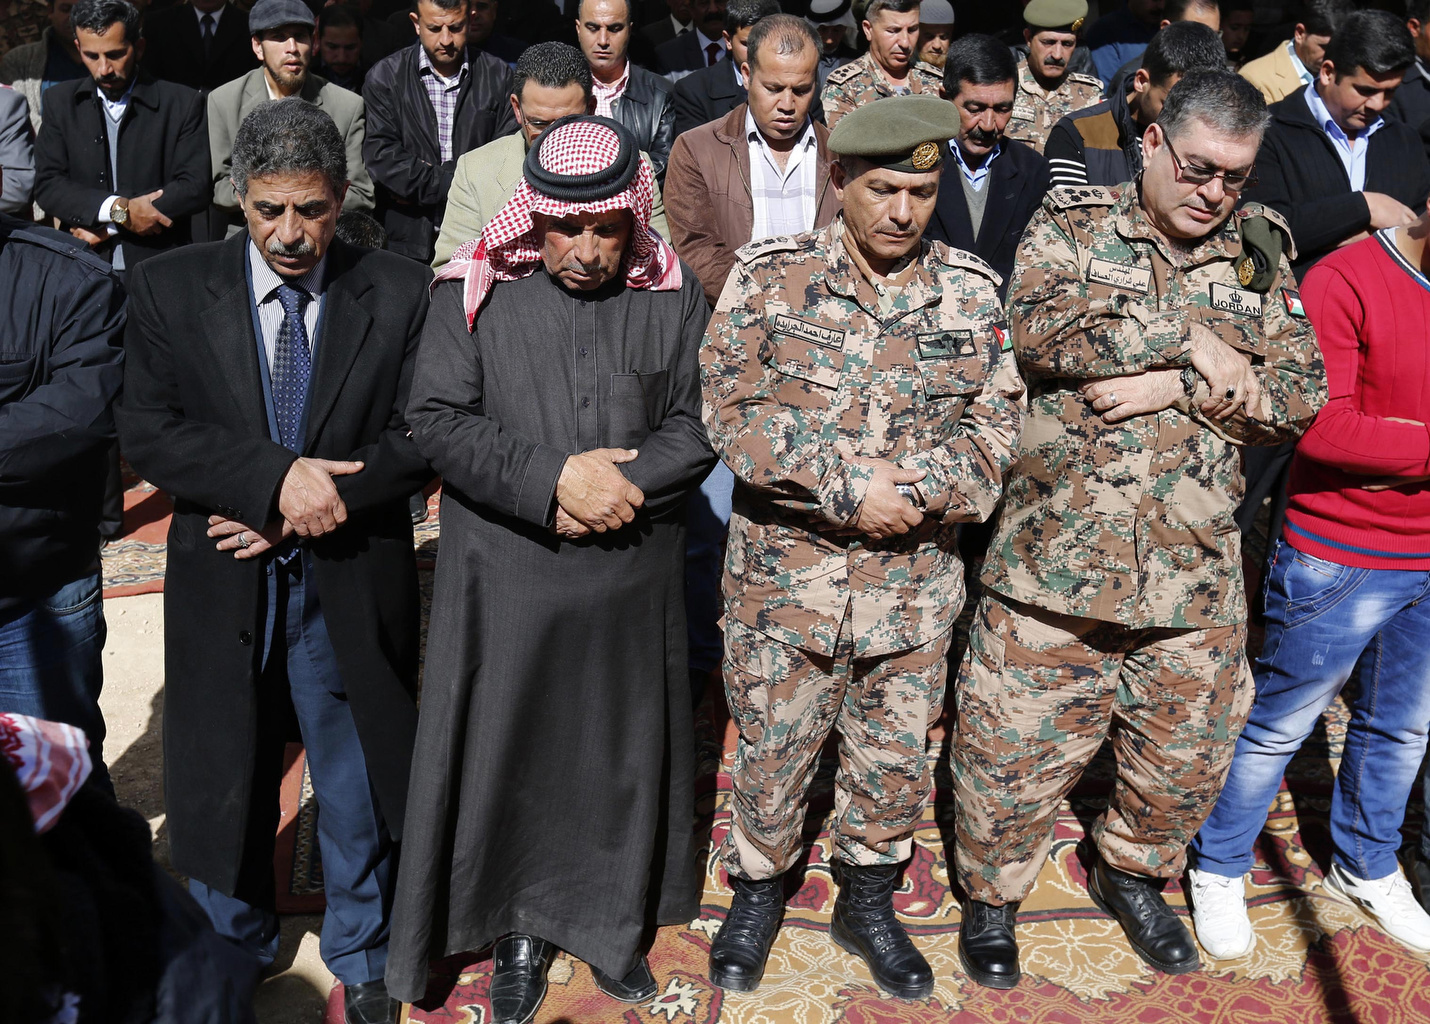 Saif al-Kasasbeh, second from left, father of First Lt. Muath al-Kasasbeh, a murdered Jordanian pilot, prays in Jordan Feb. 4 with other mourners during an event commemorating the pilot's death at the hands of Islamic State militants. (CNS/EPA/Jasmal N asrallah) 